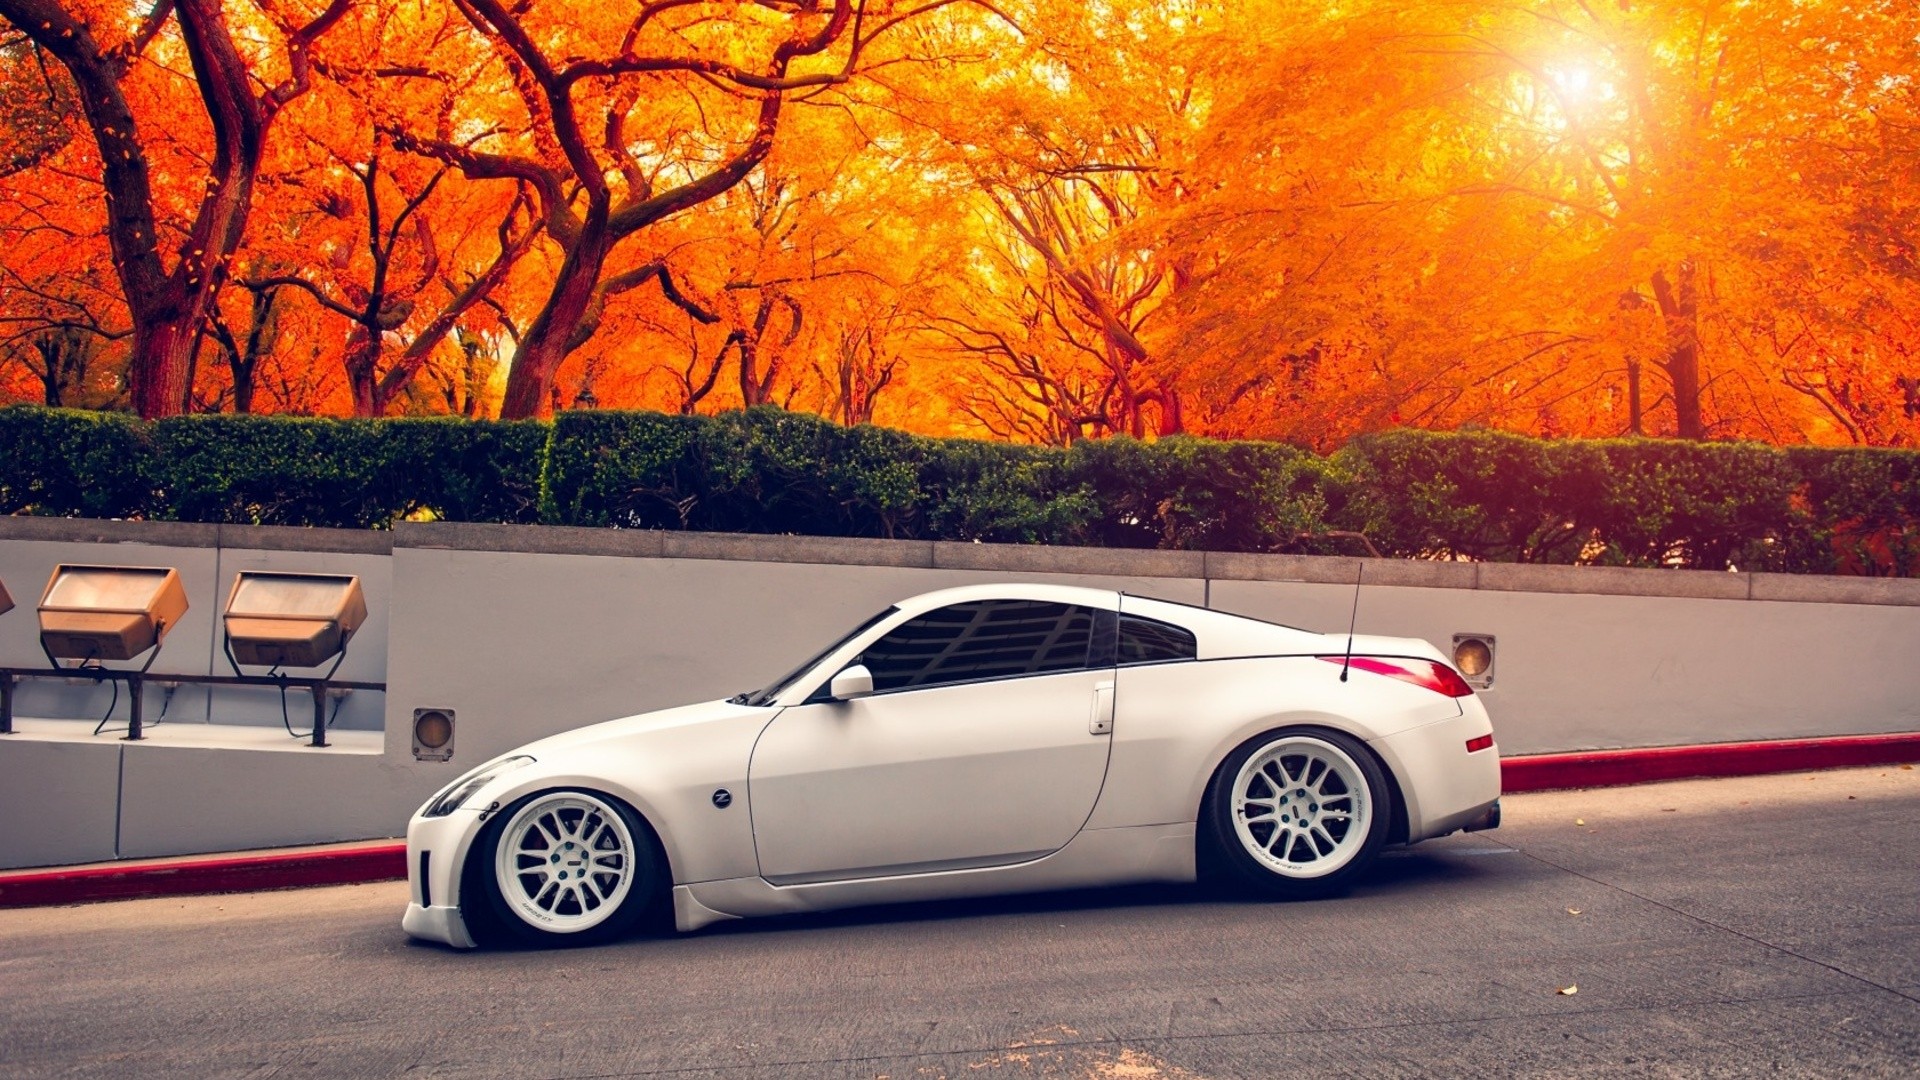 General 1920x1080 car Nissan Nissan 350Z Nissan Fairlady Z side view sunlight trees white cars vehicle